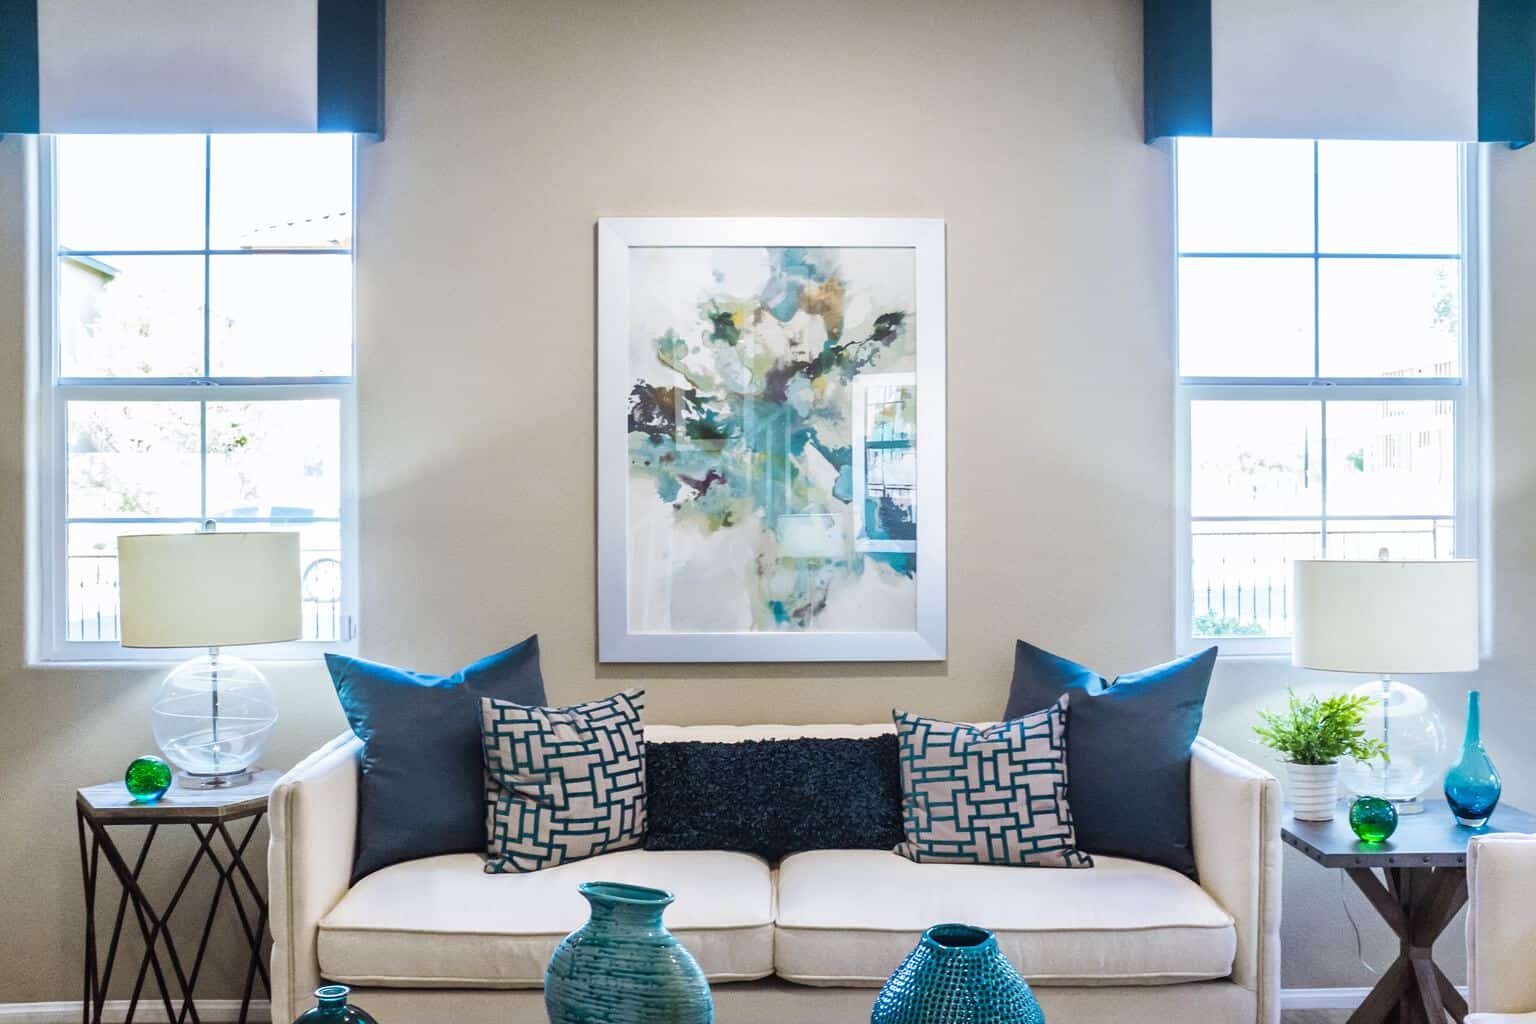 Image shows a white living room with blue accent pillows and curtains